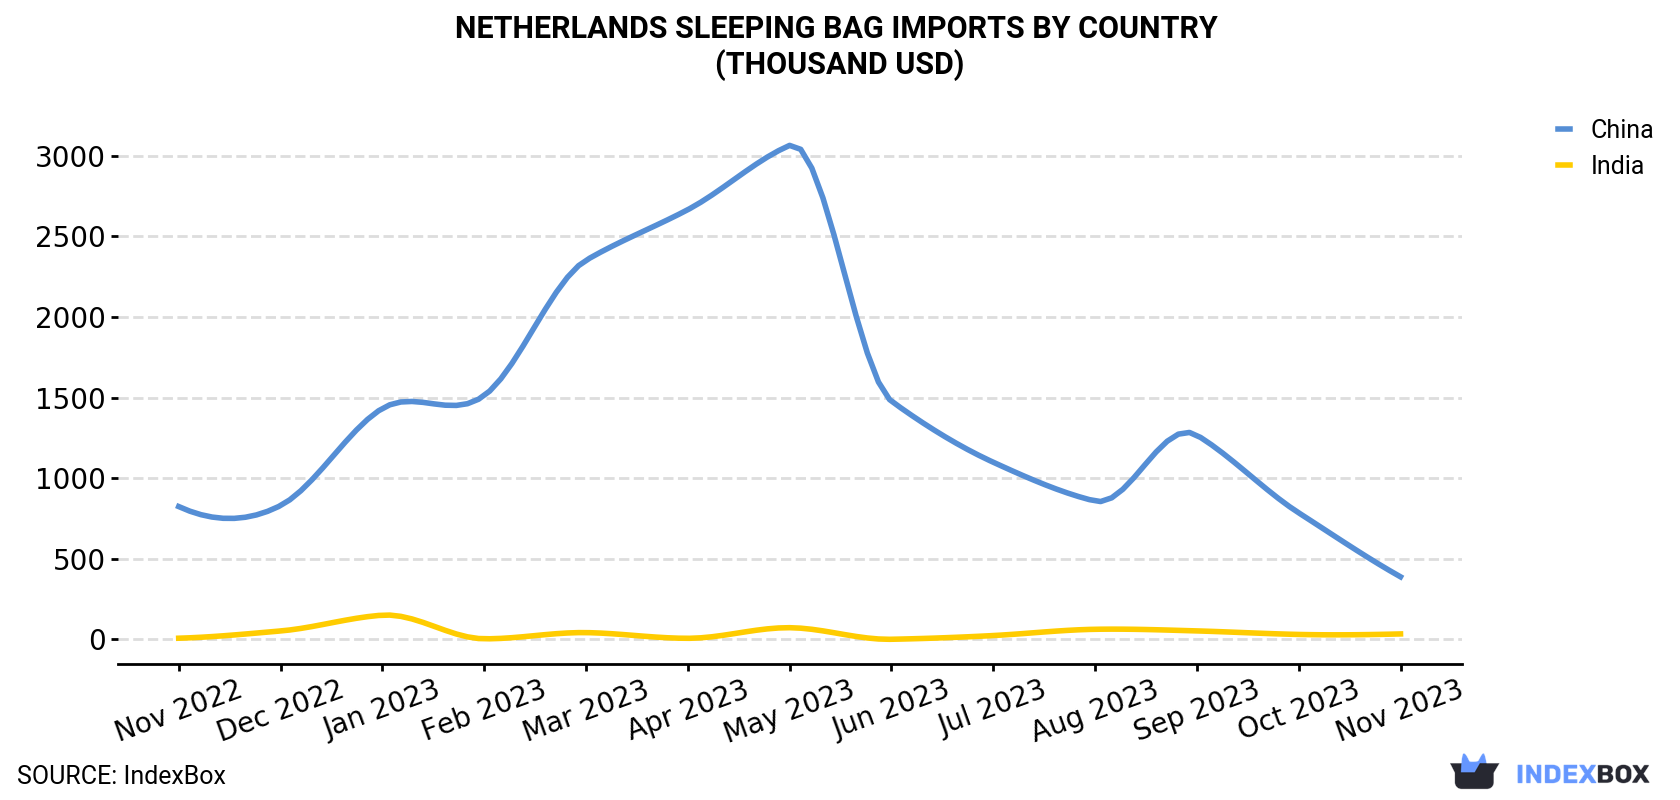 Netherlands Sleeping Bag Imports By Country (Thousand USD)